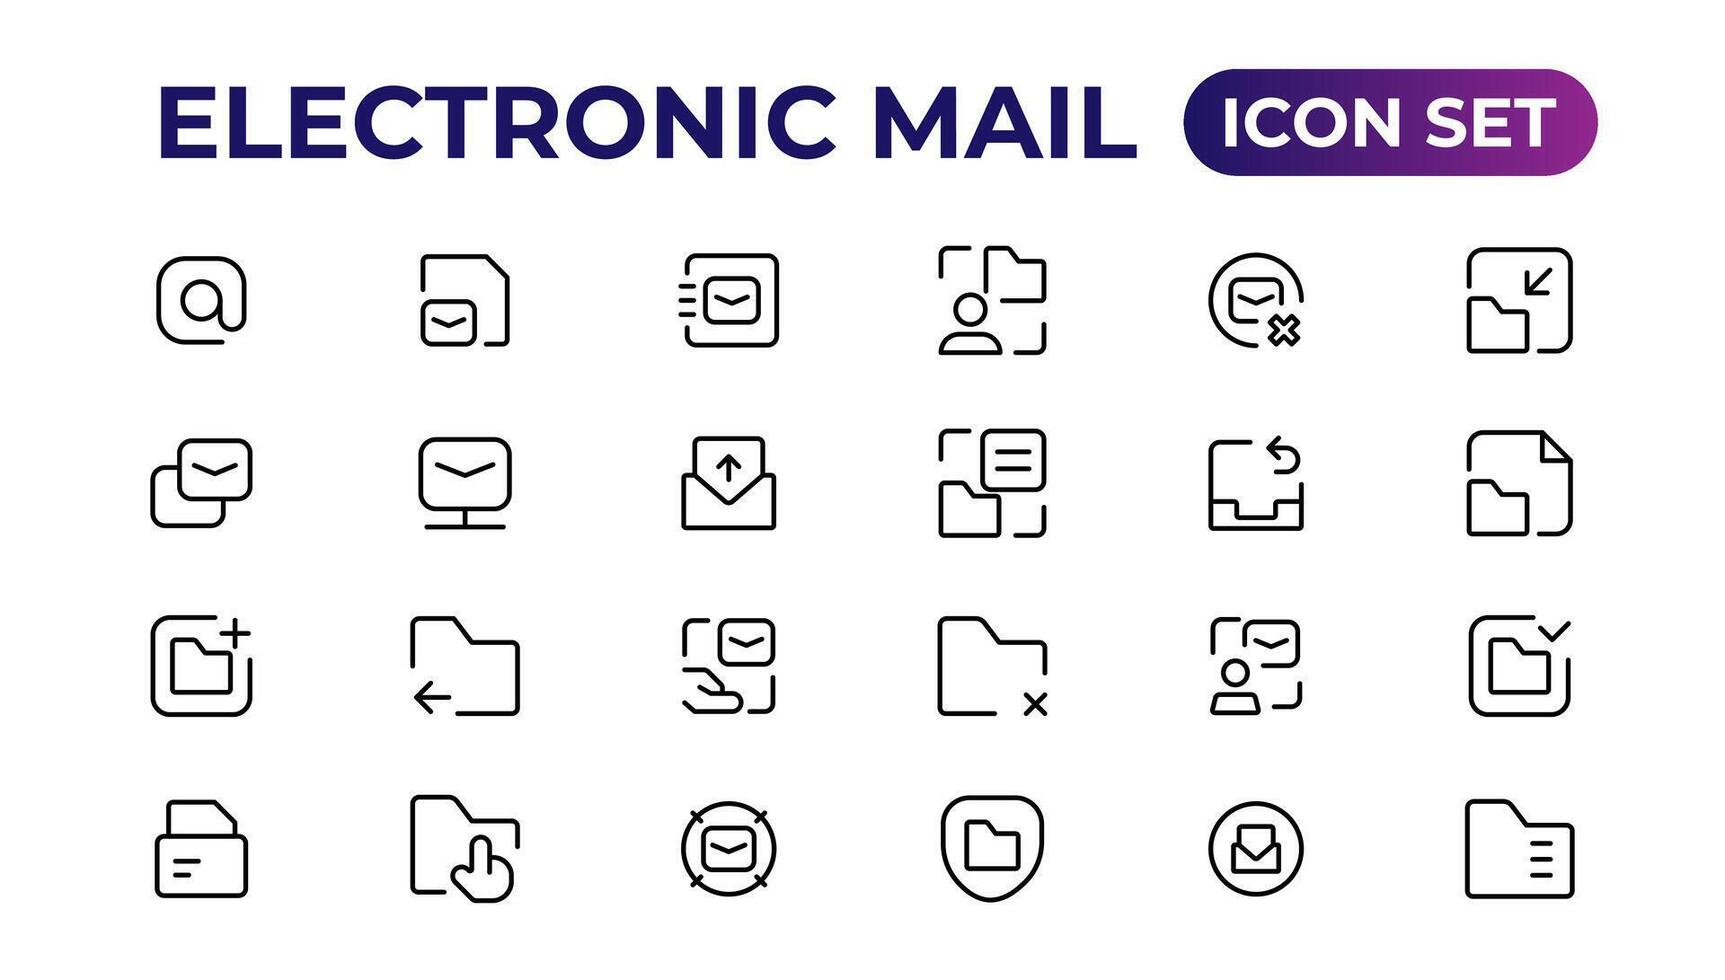 Mail icon set. email icon vector. E-mail icon.Outline icon collection. vector